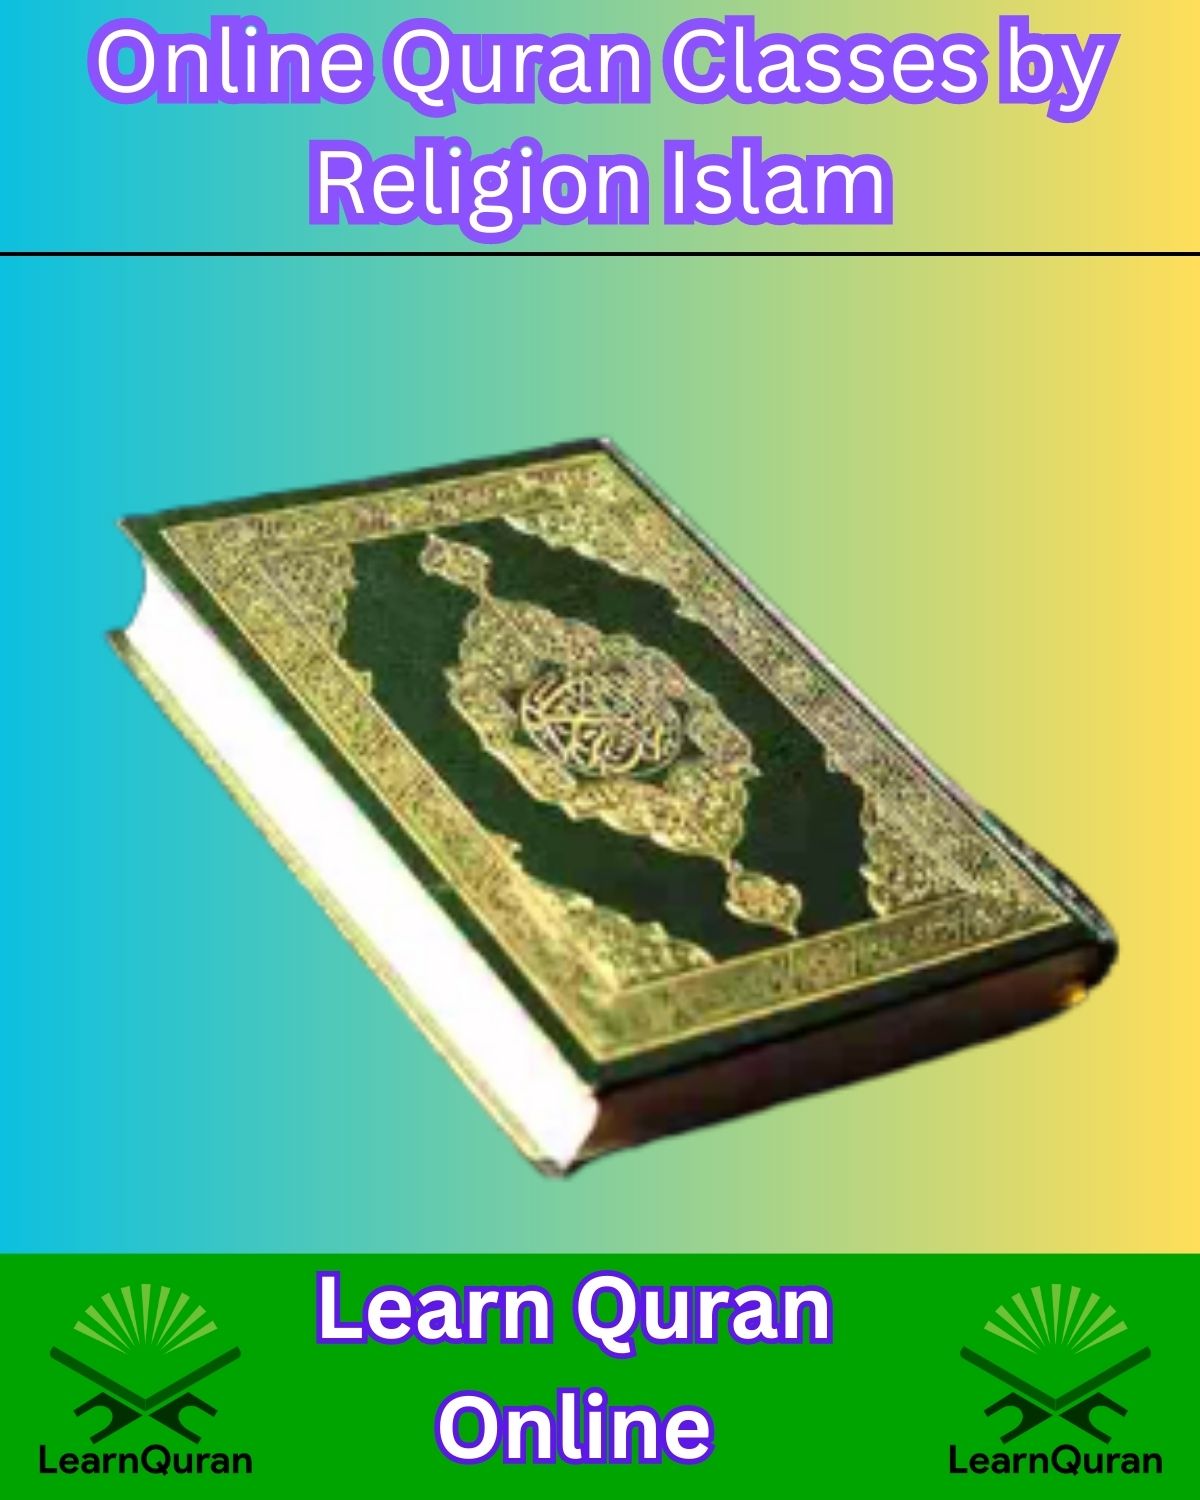 Online Quran Classes by Religion Islam